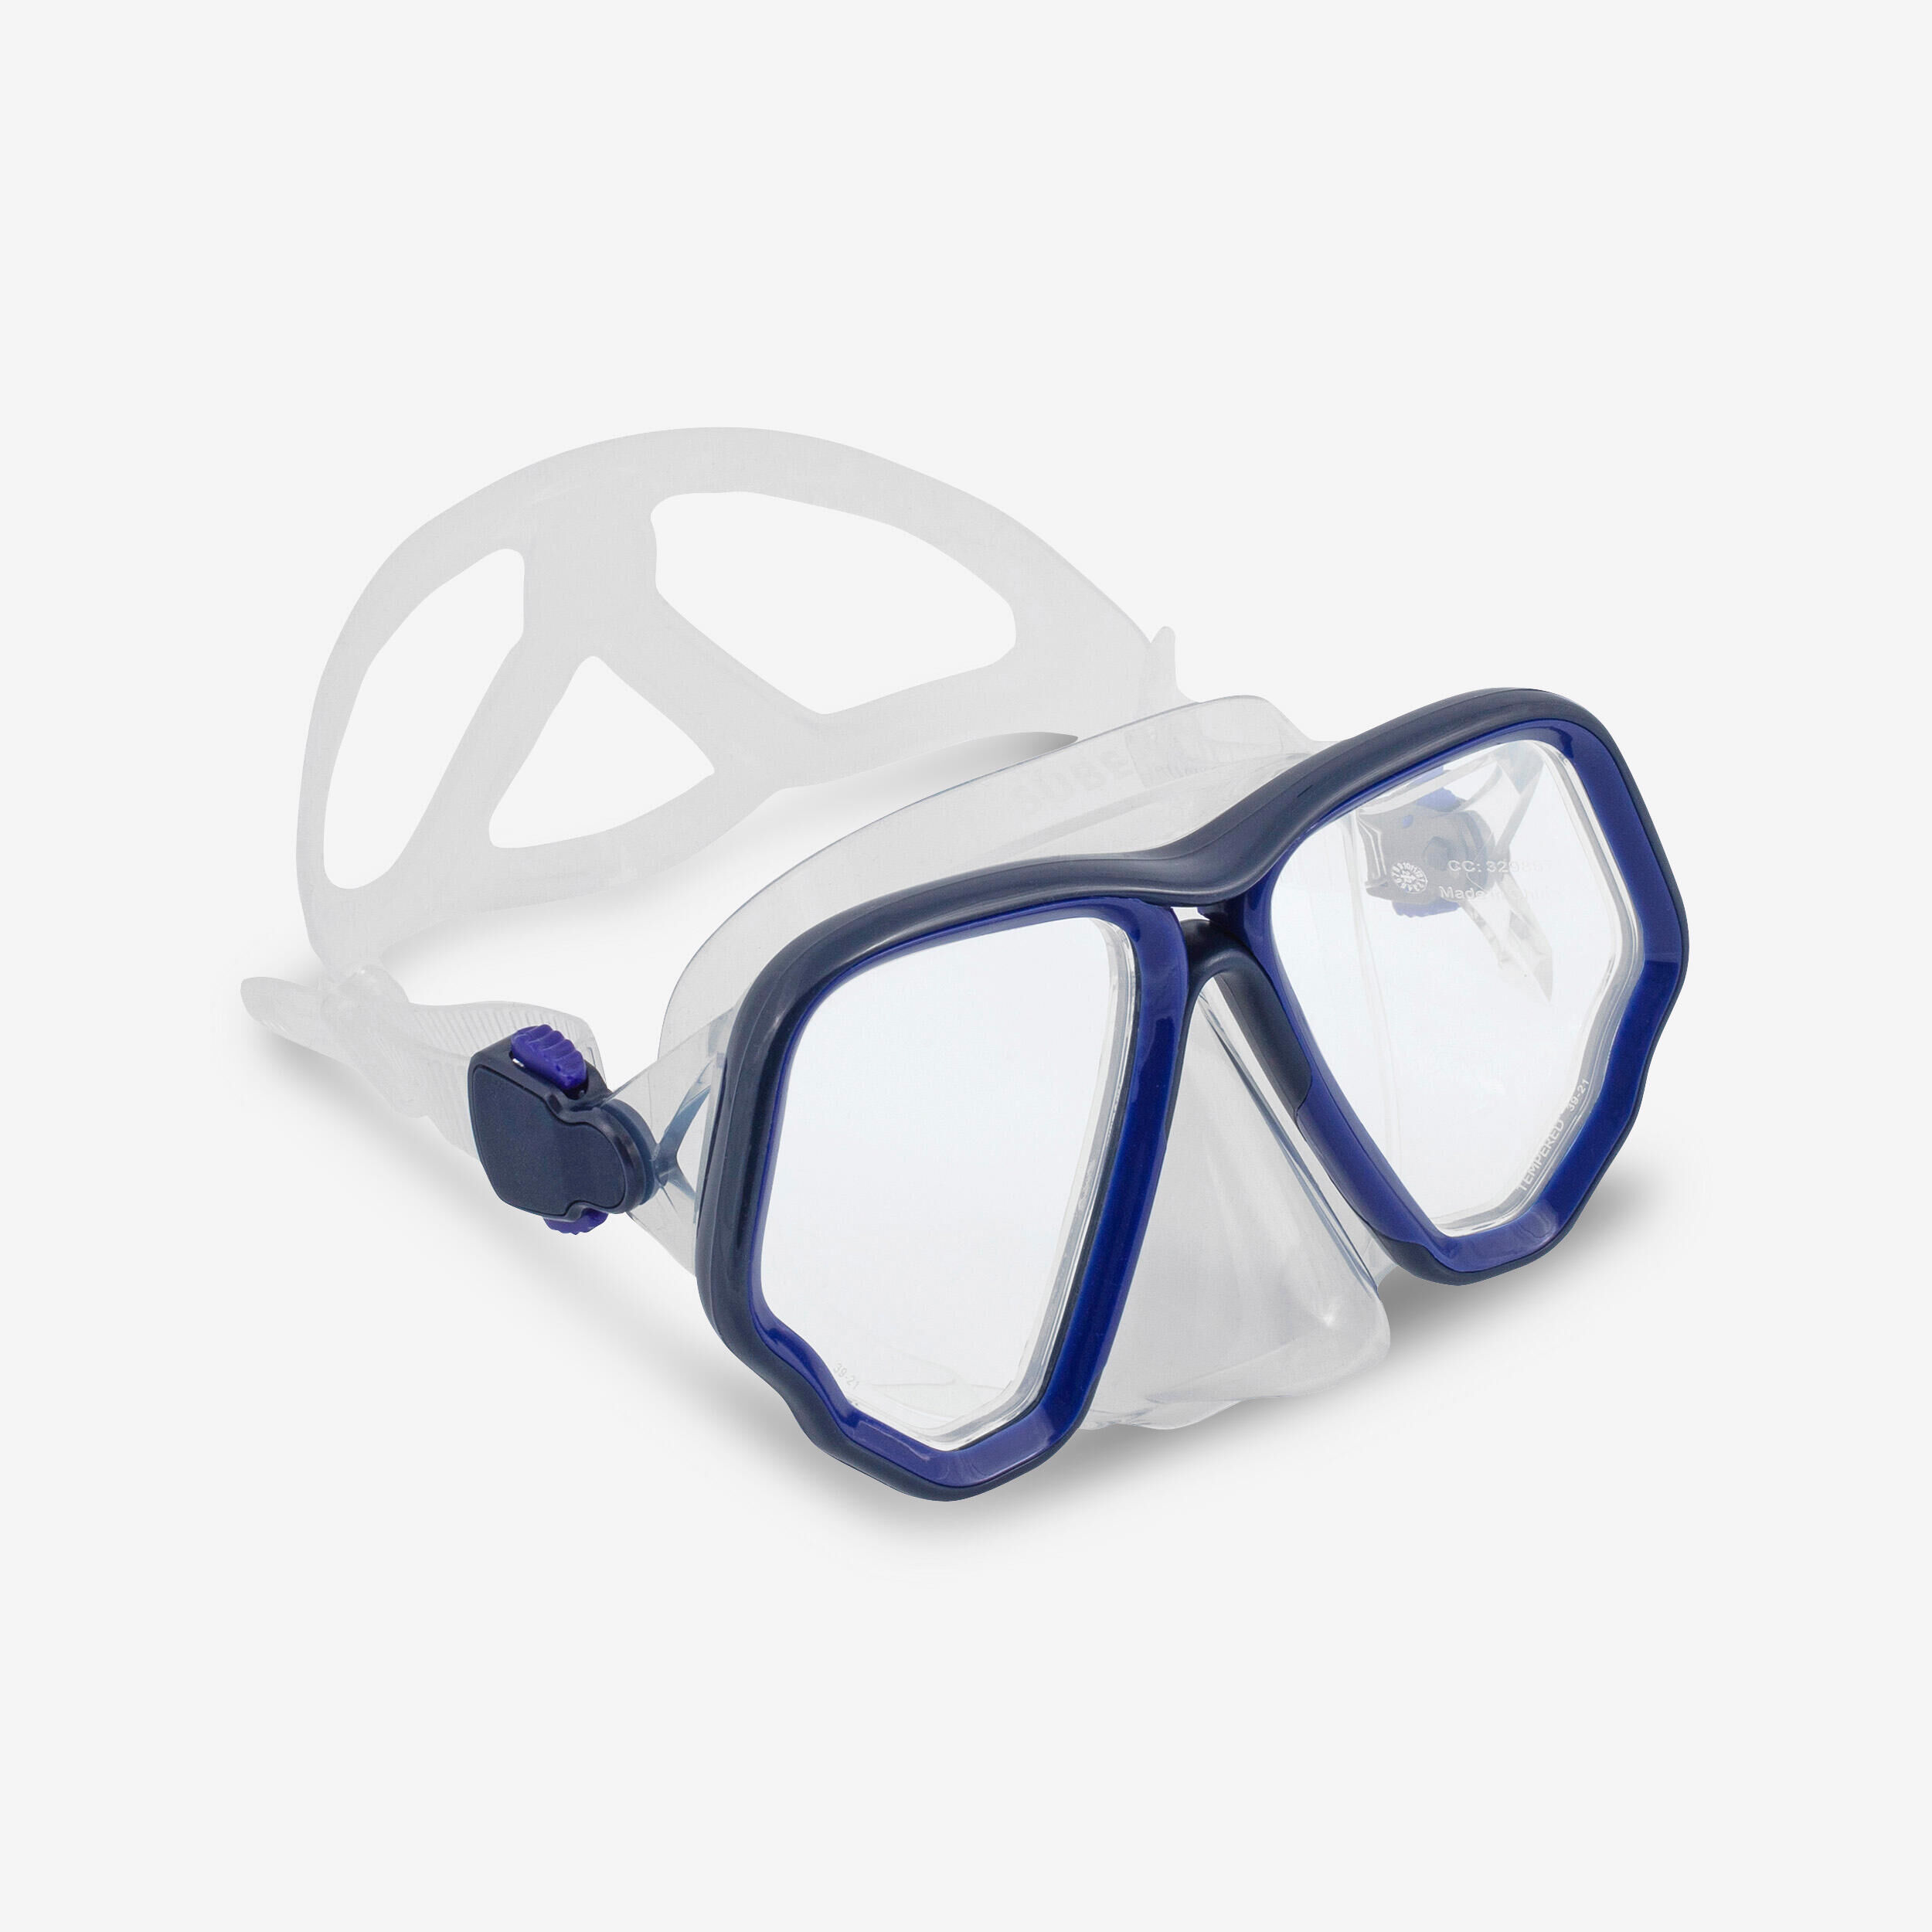 SUBEA Diving mask - 500 Dual Crystal Blue